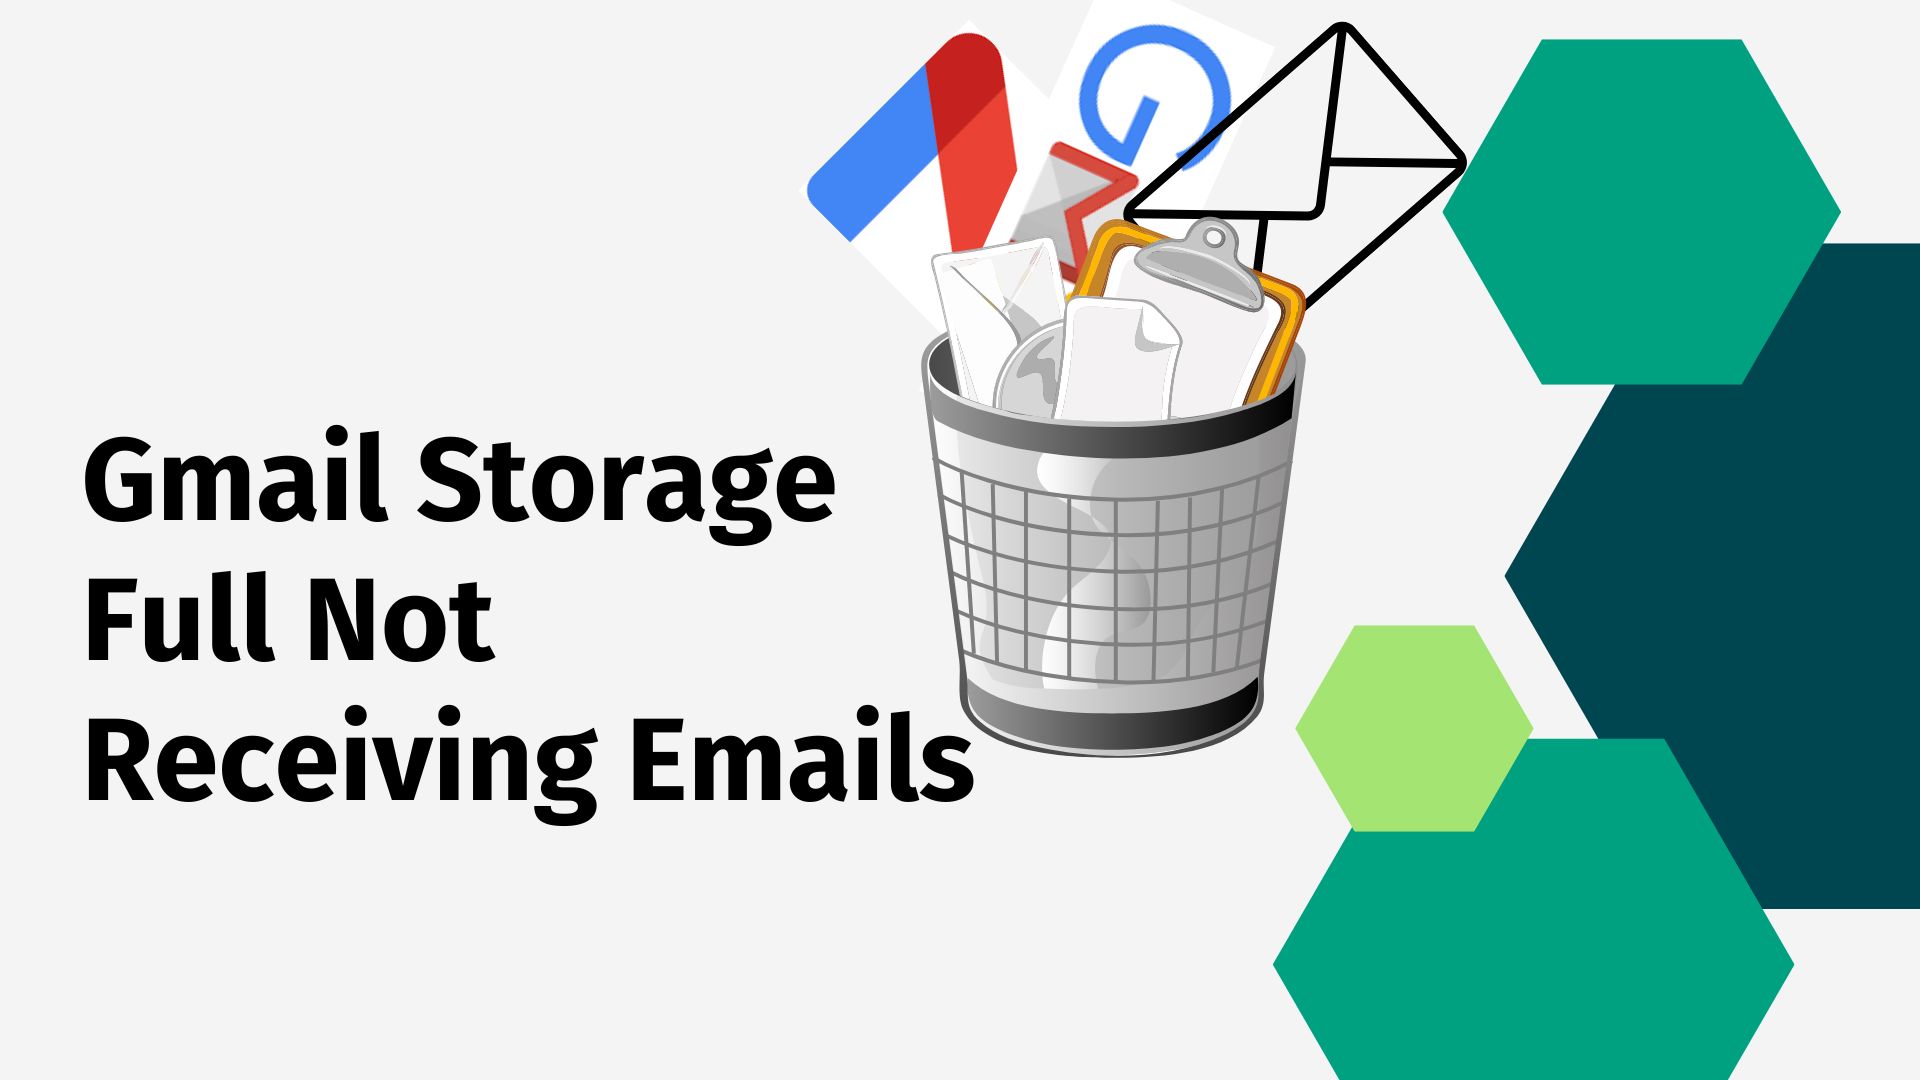 Gmail Storage Full Not receiving Emails